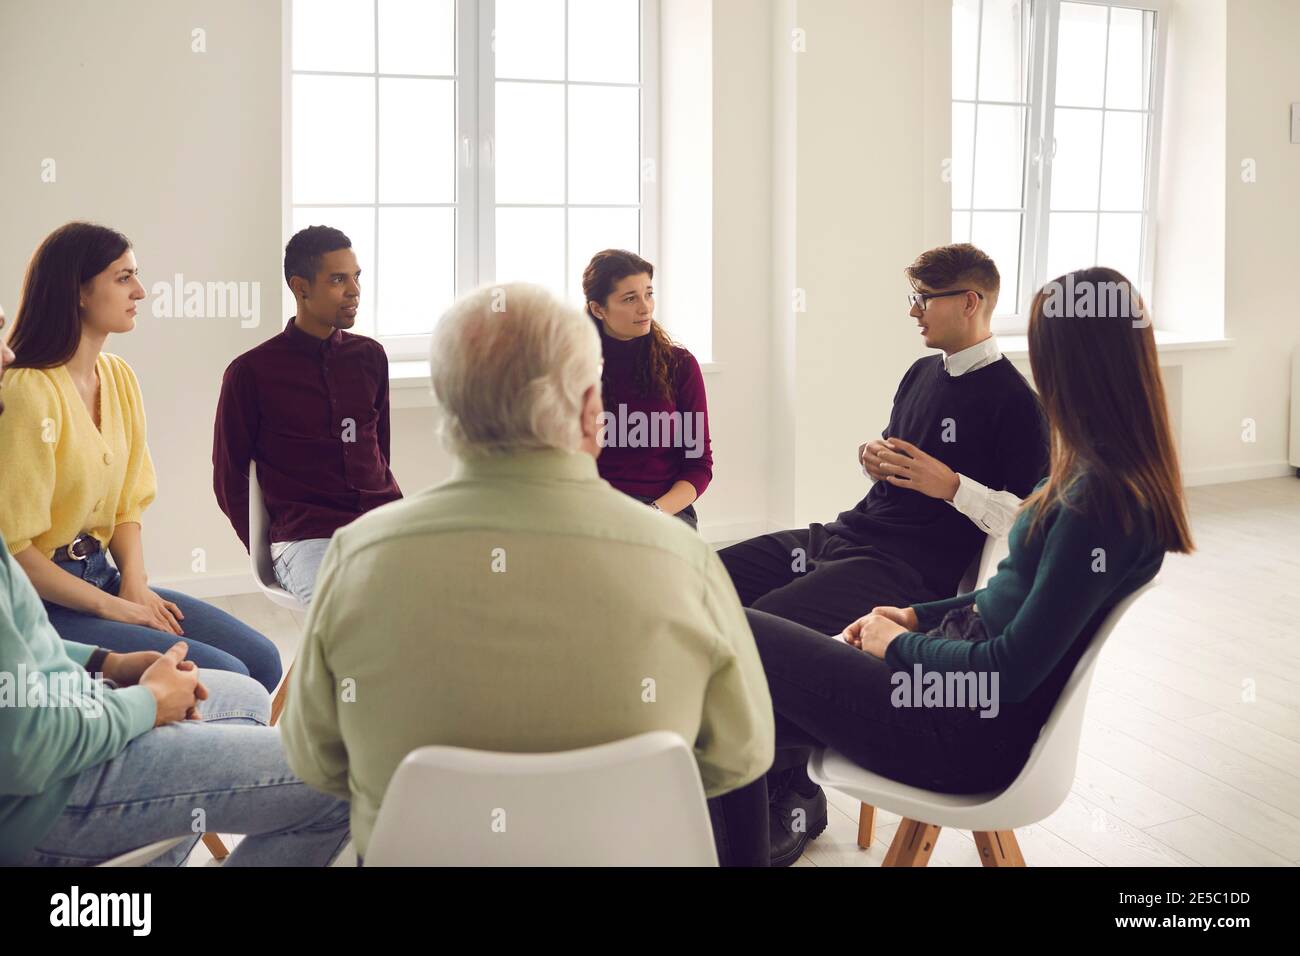 Diverse patients sitting in circle and listening to therapist in group therapy meeting Stock Photo